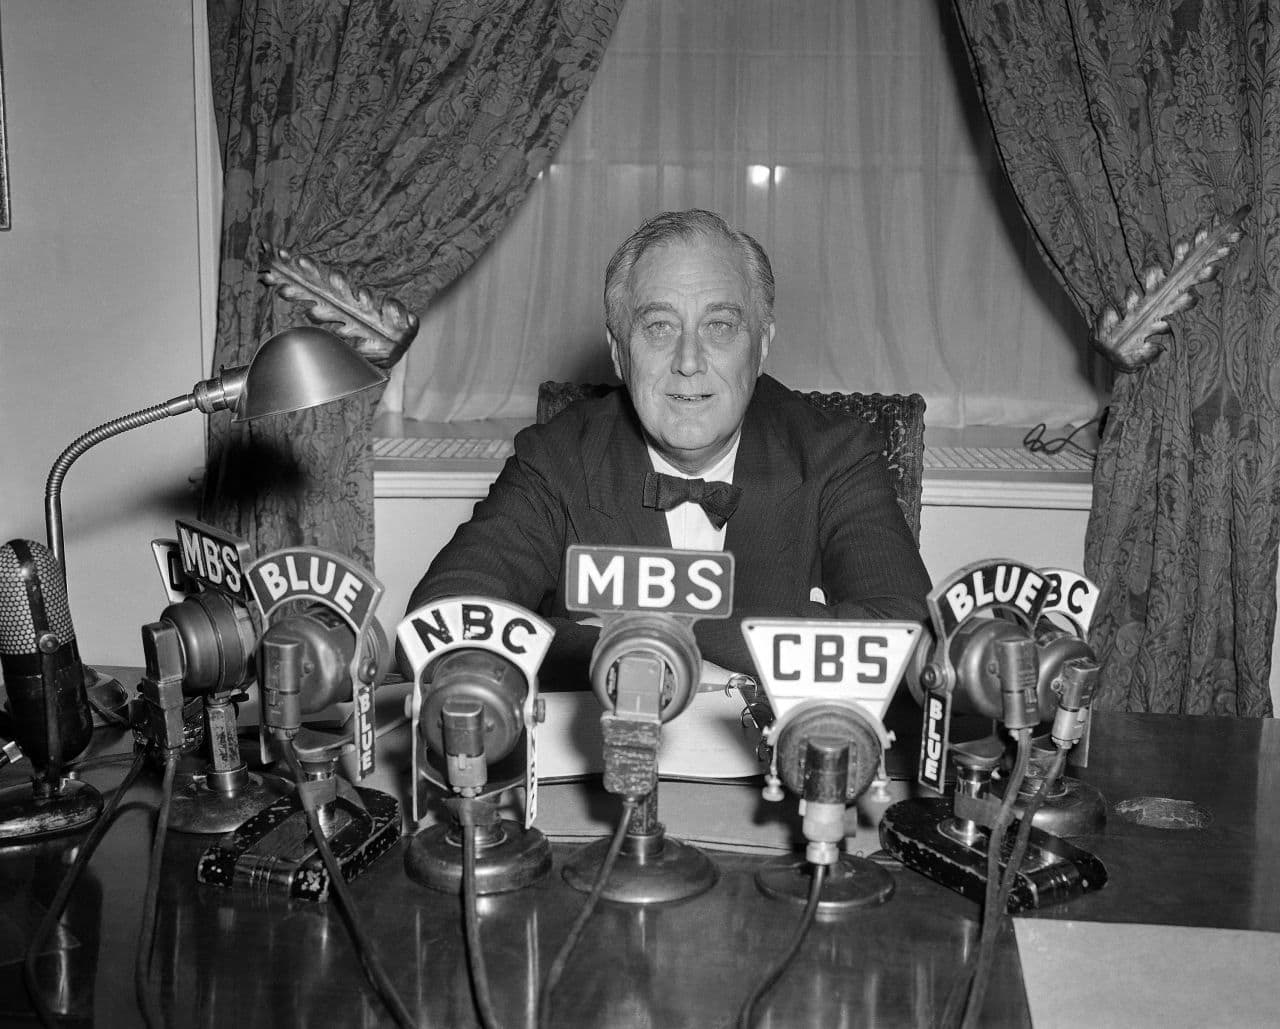 FDR probably didn’t suffer from polio -- the disease he has long been associated with. Instead, many researchers think the evidence points to a different cause of FDR’s paralysis -- a rarer disease called Guillain-Barre syndrome. Here he is in 1943. (George R. Skadding/AP)